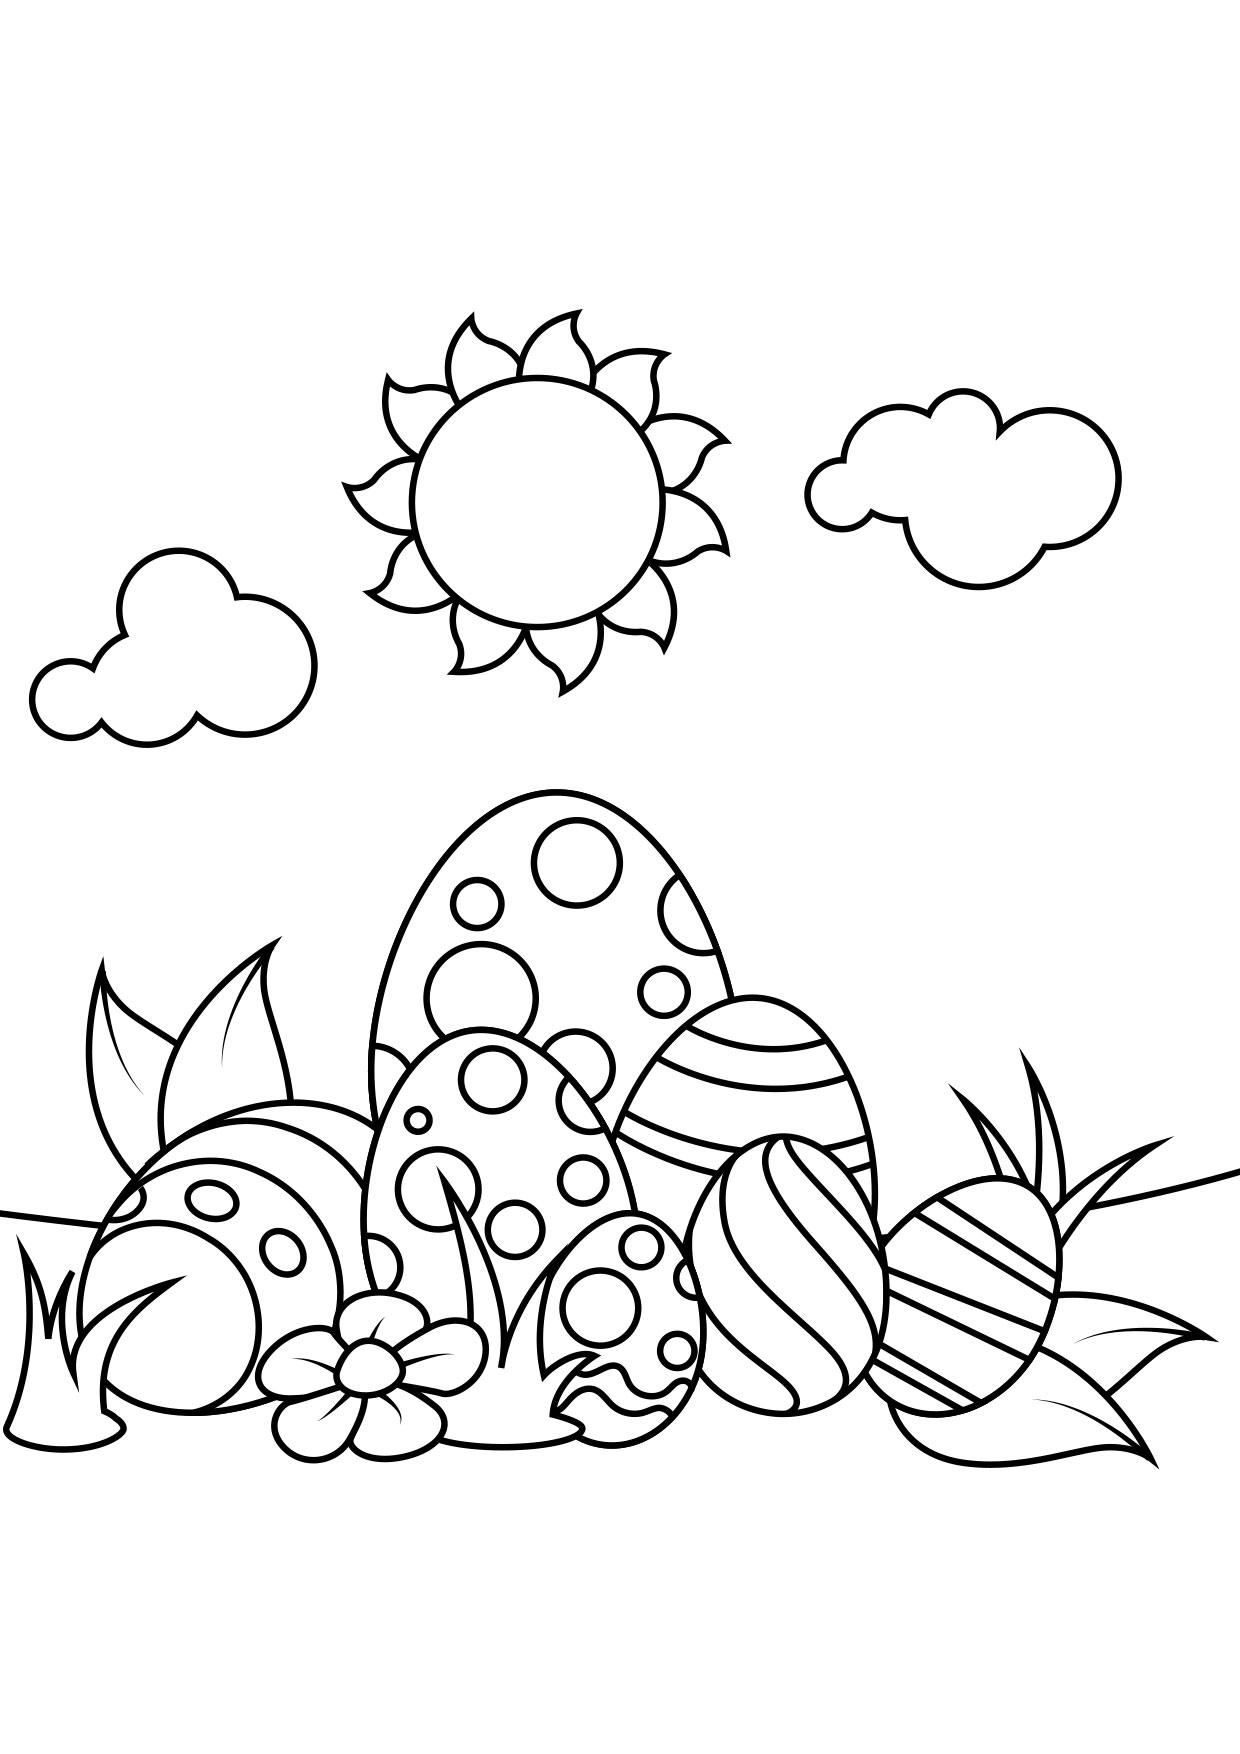 Coloring page Easter eggs under the sun